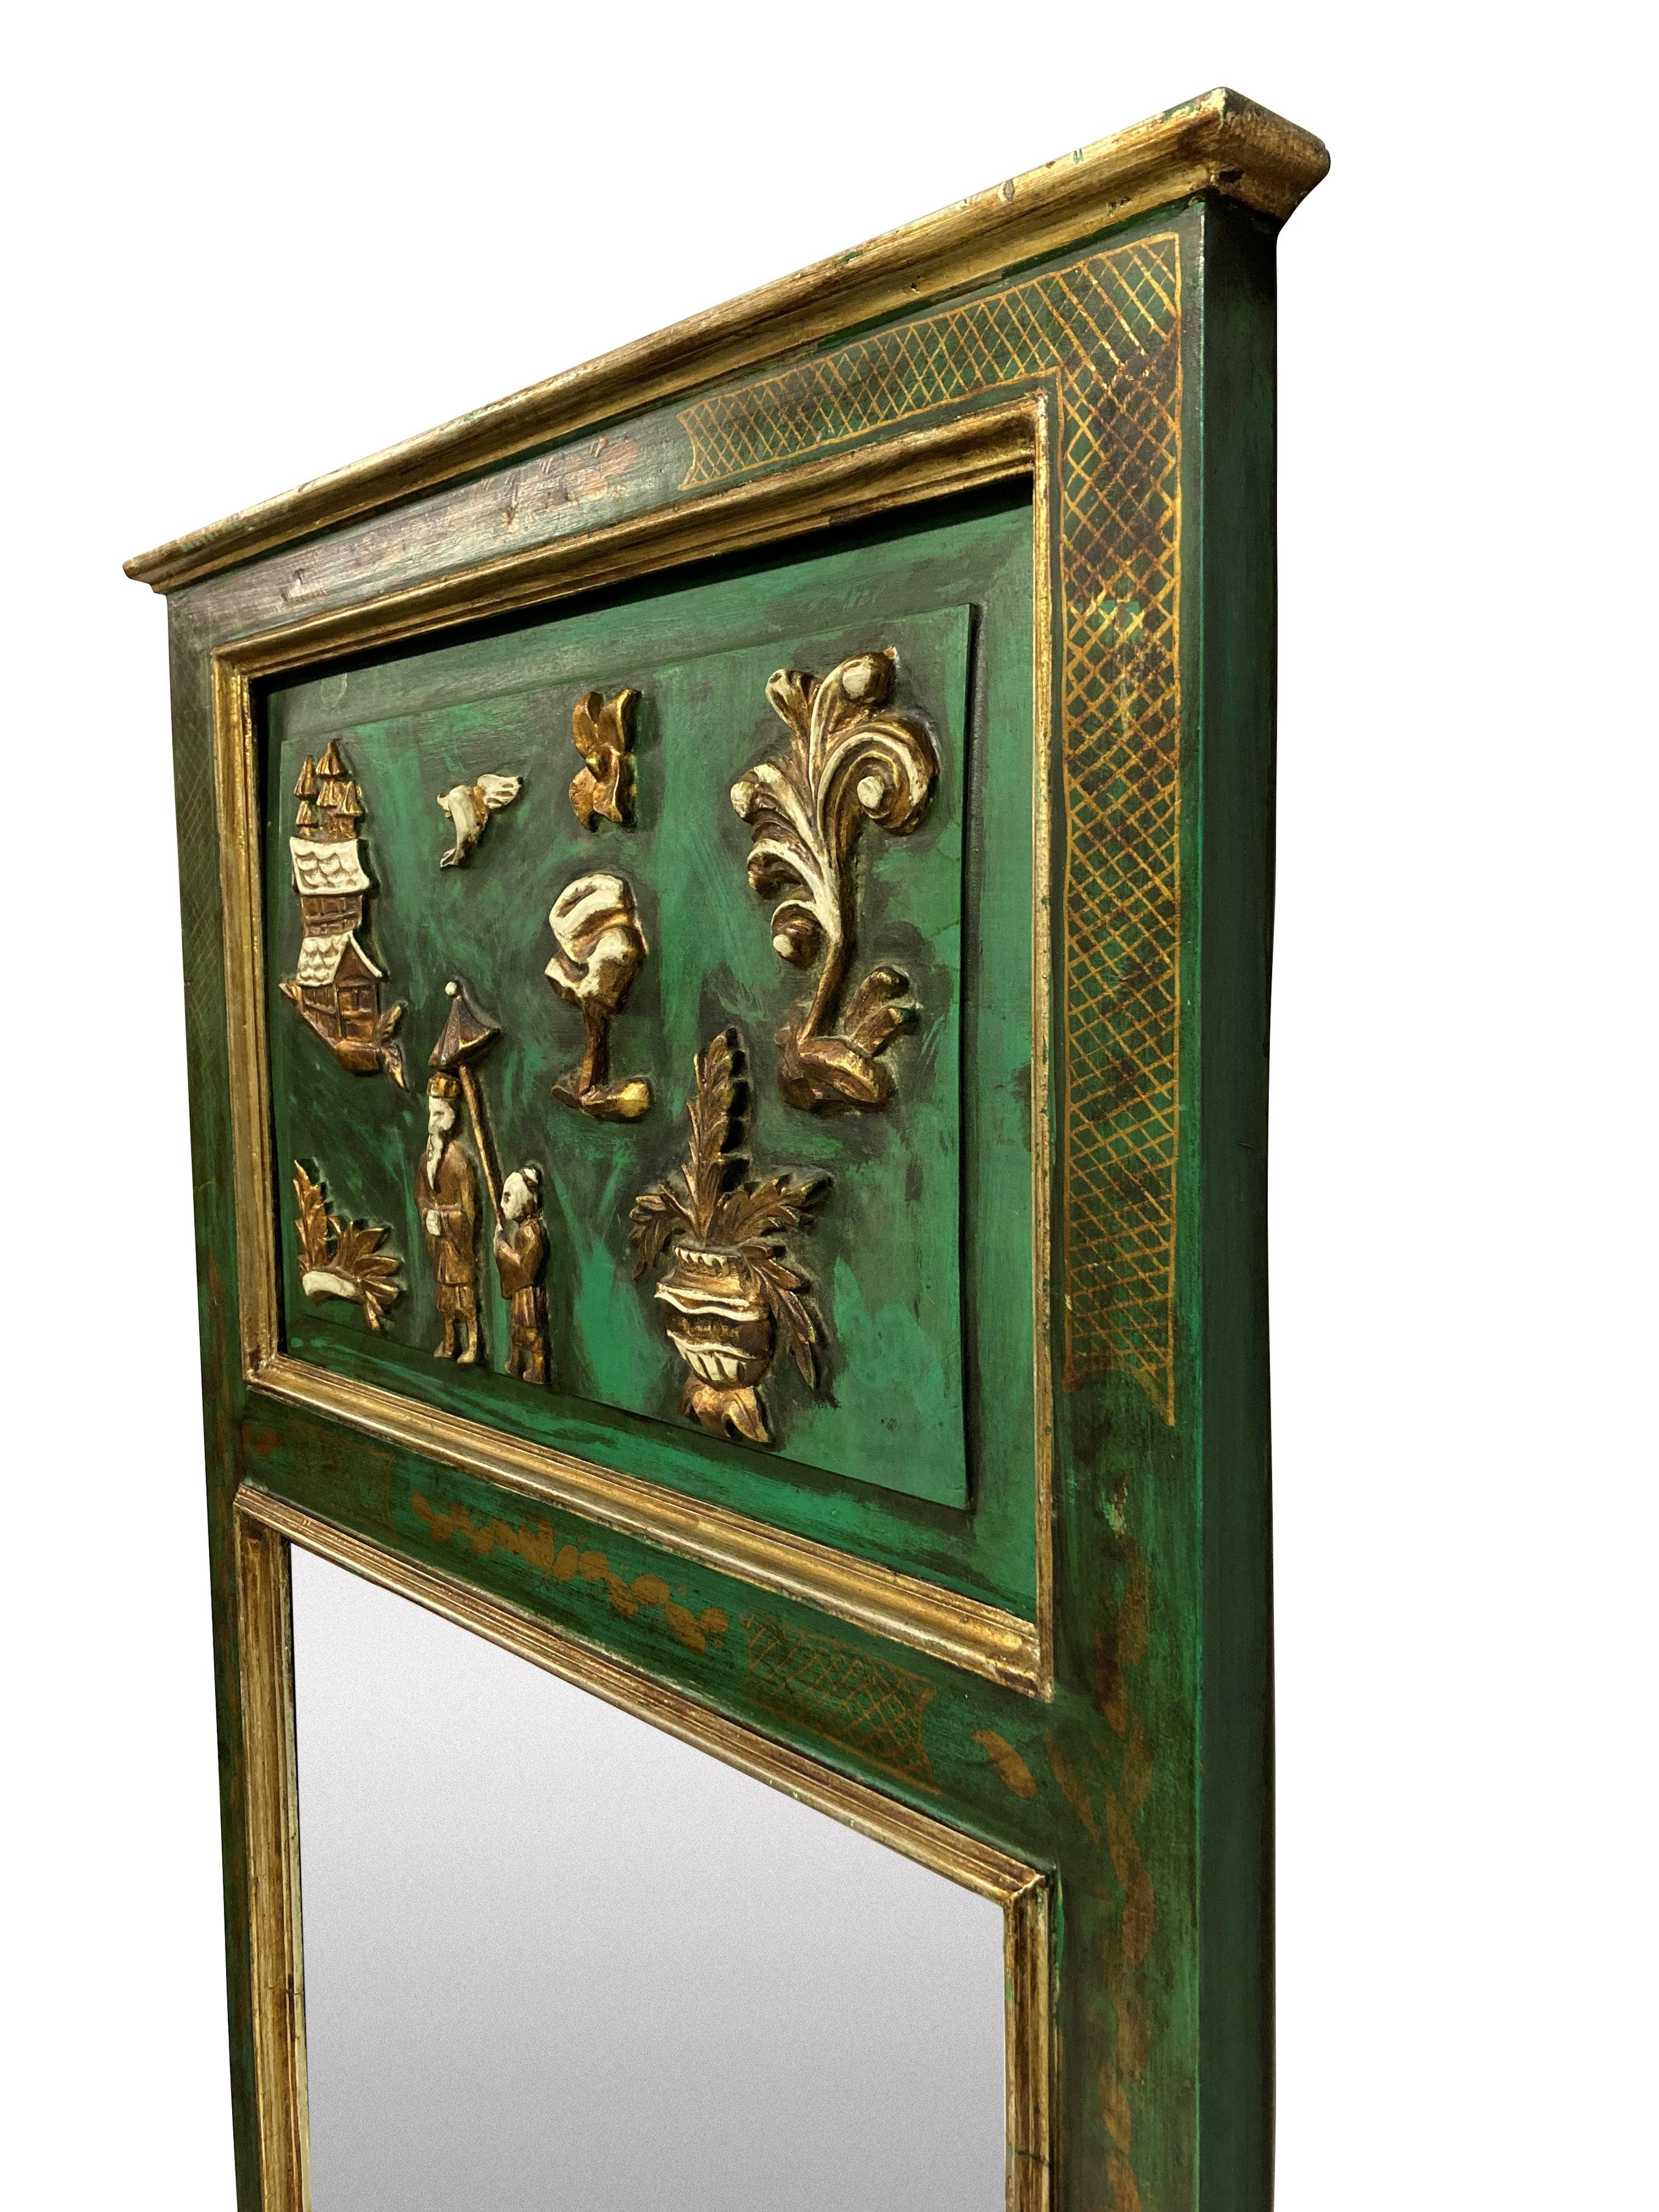 An charming English mid-century emerald green Japanned trumeau mirror, with a naive scene above and mirror plate below.